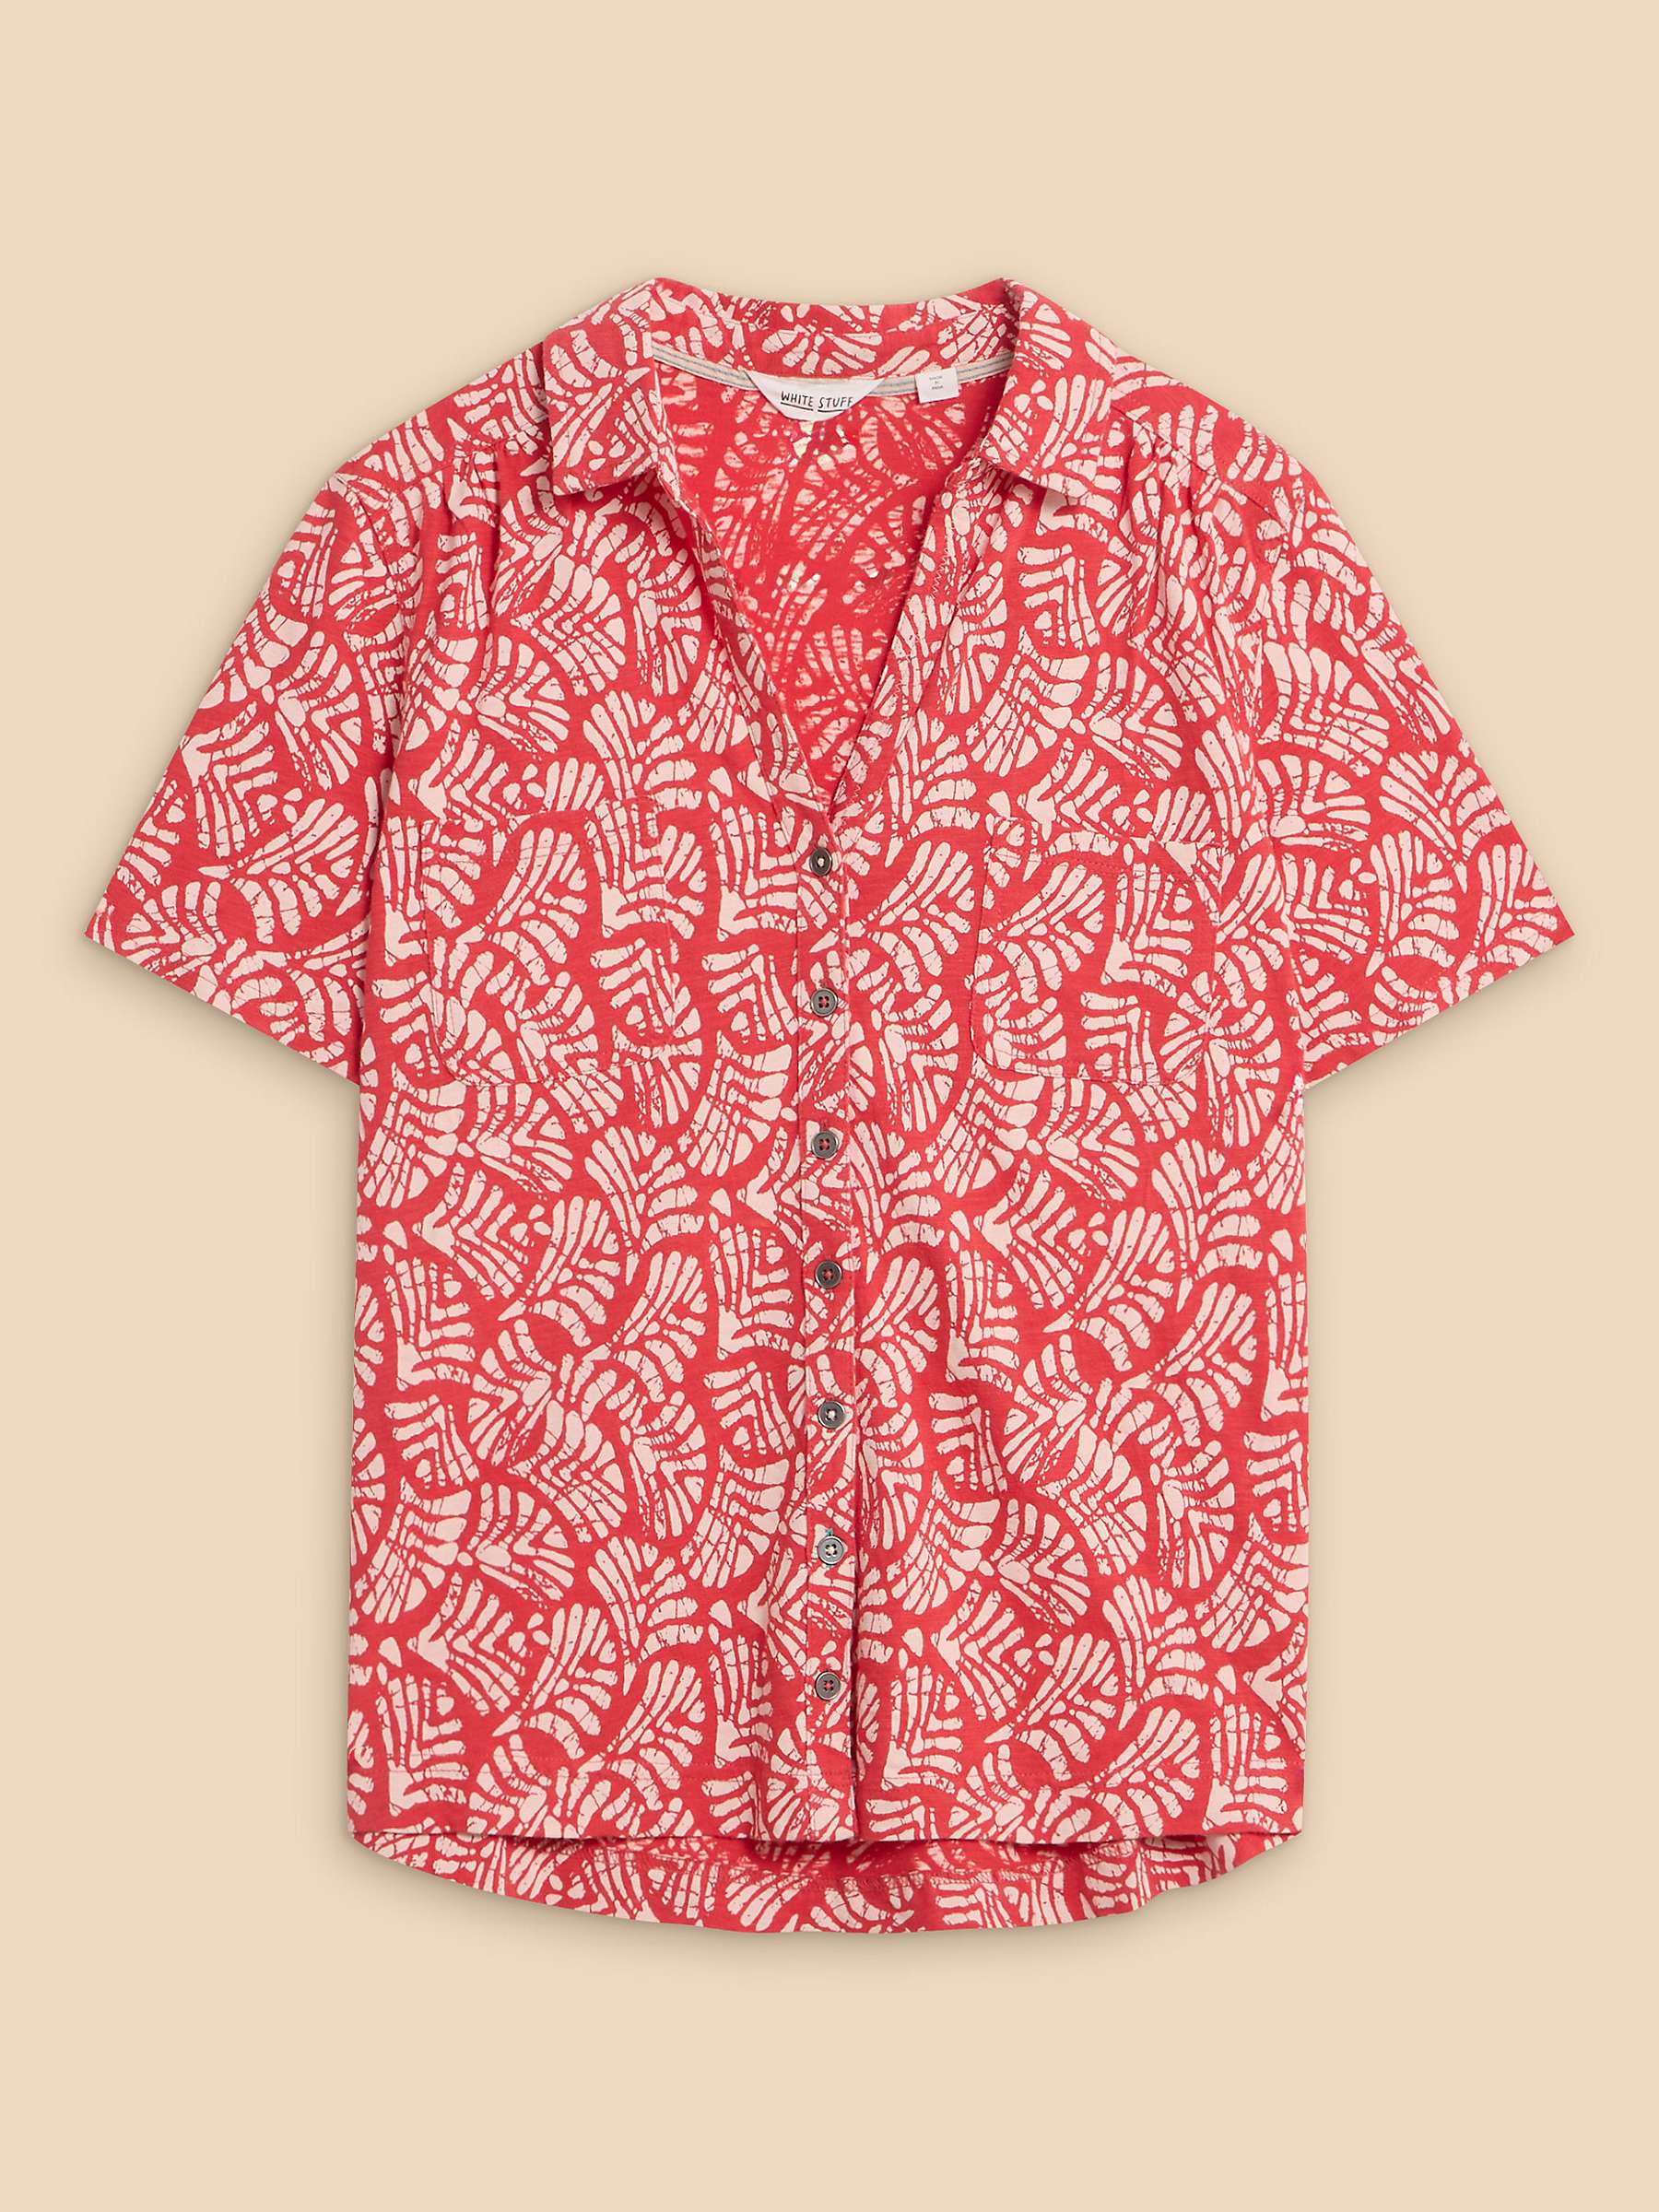 Buy White Stuff Penny Pocket Jersey Shirt, Red Online at johnlewis.com